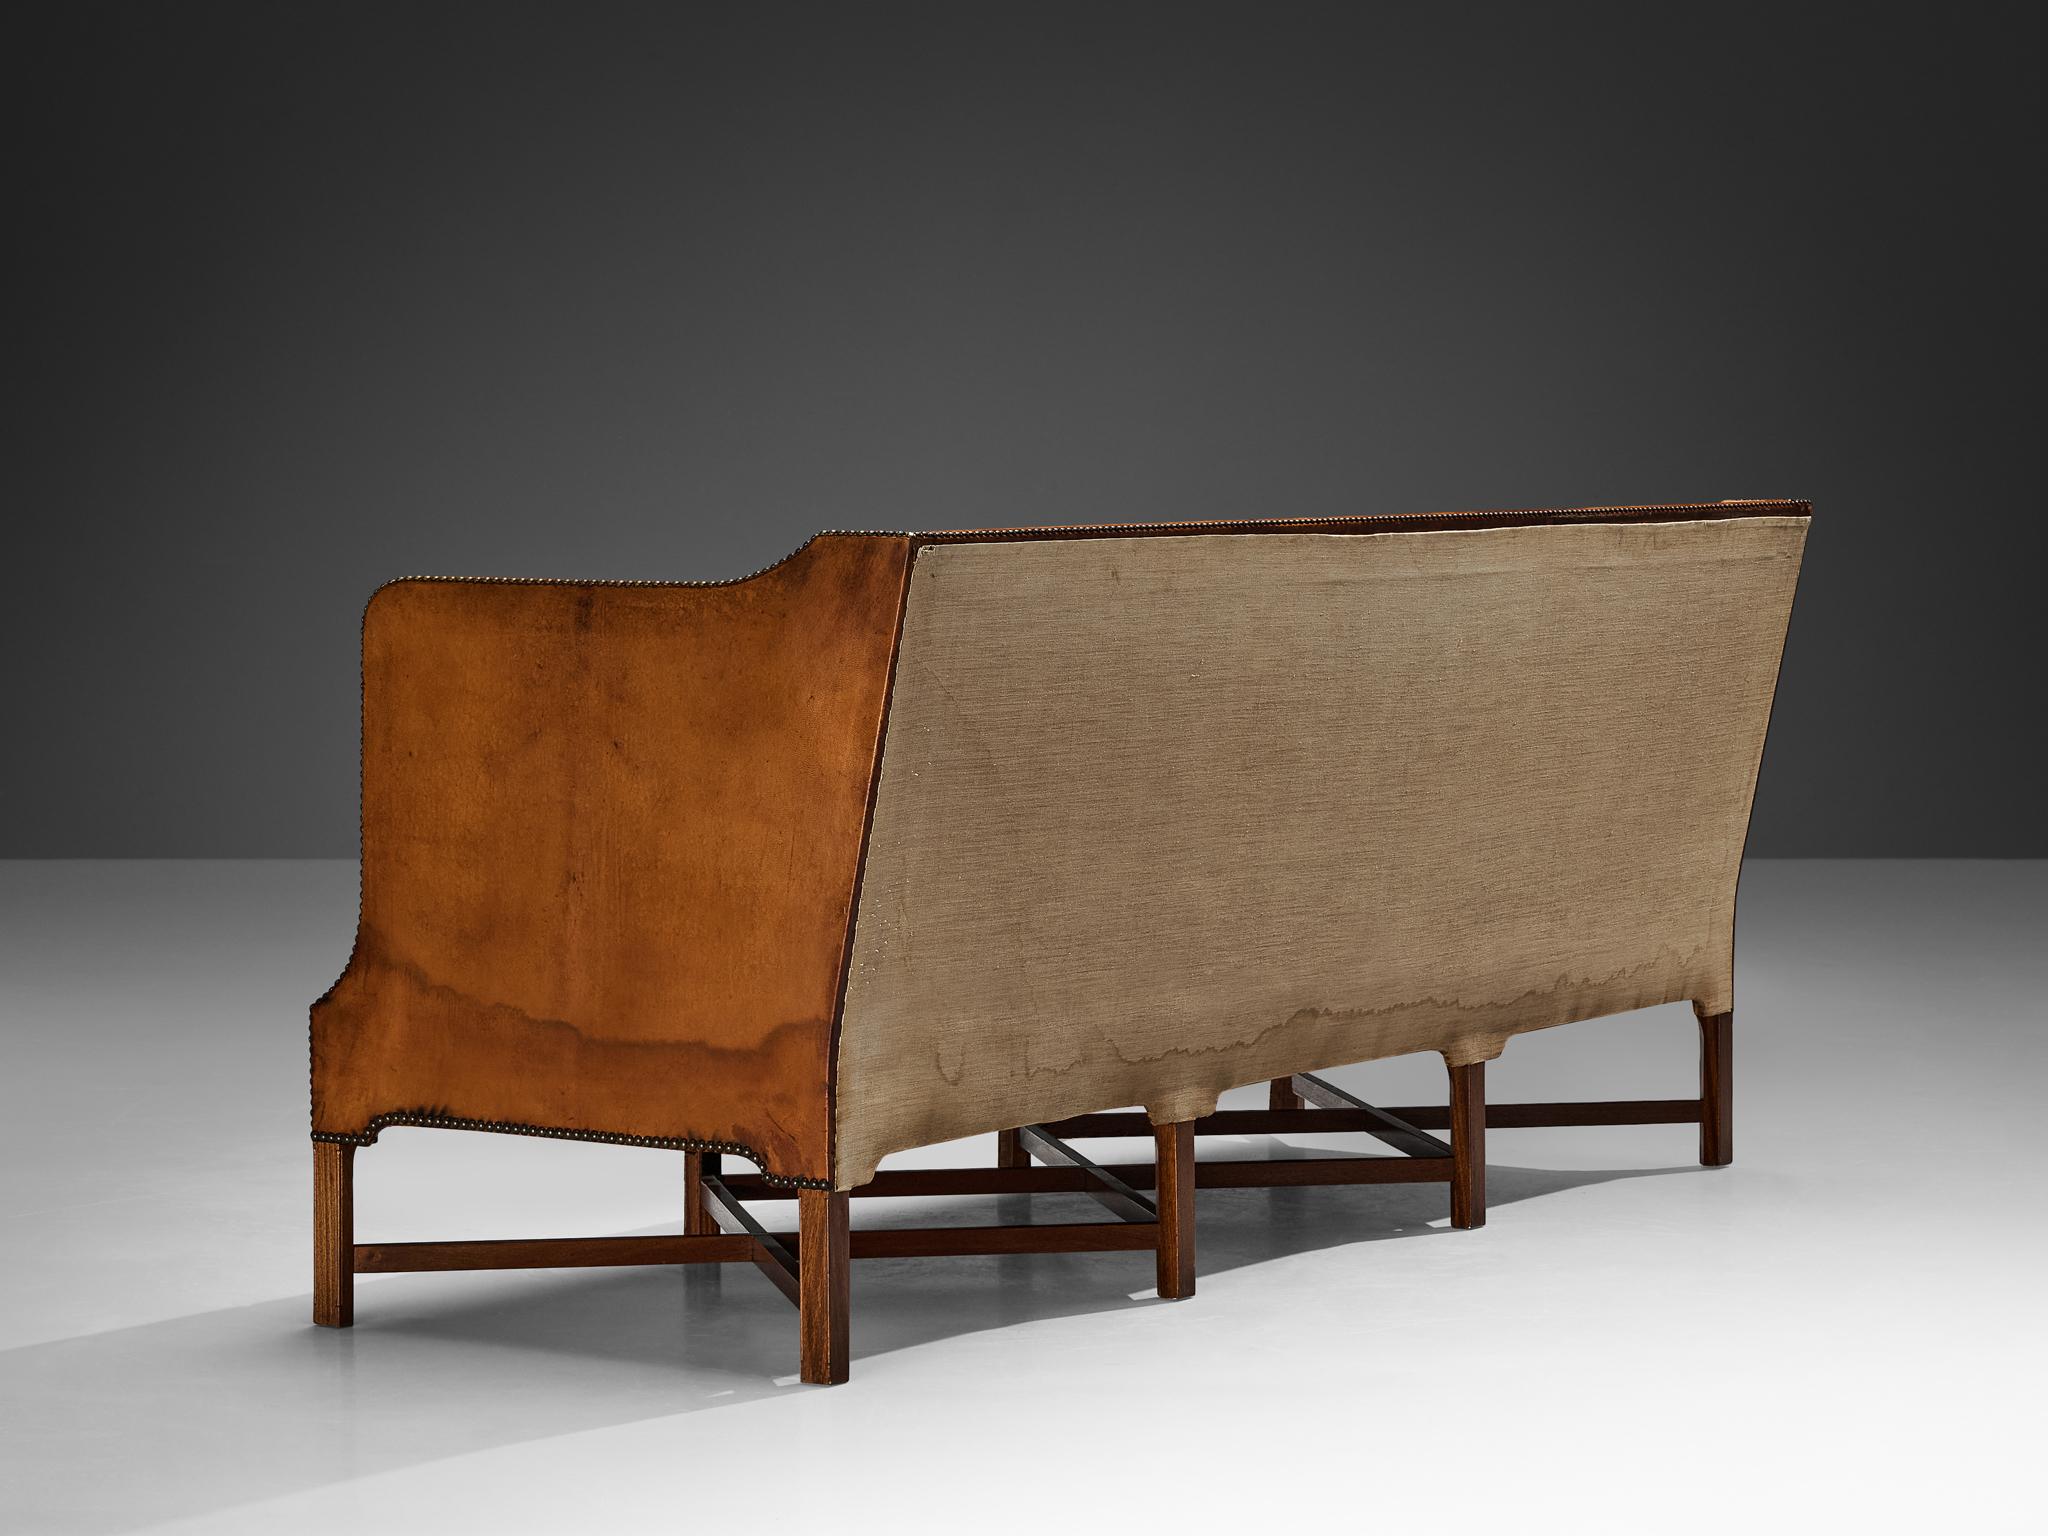 Kaare Klint for Rud Rasmussen Sofa in Original Niger Leather and Mahogany  For Sale 2